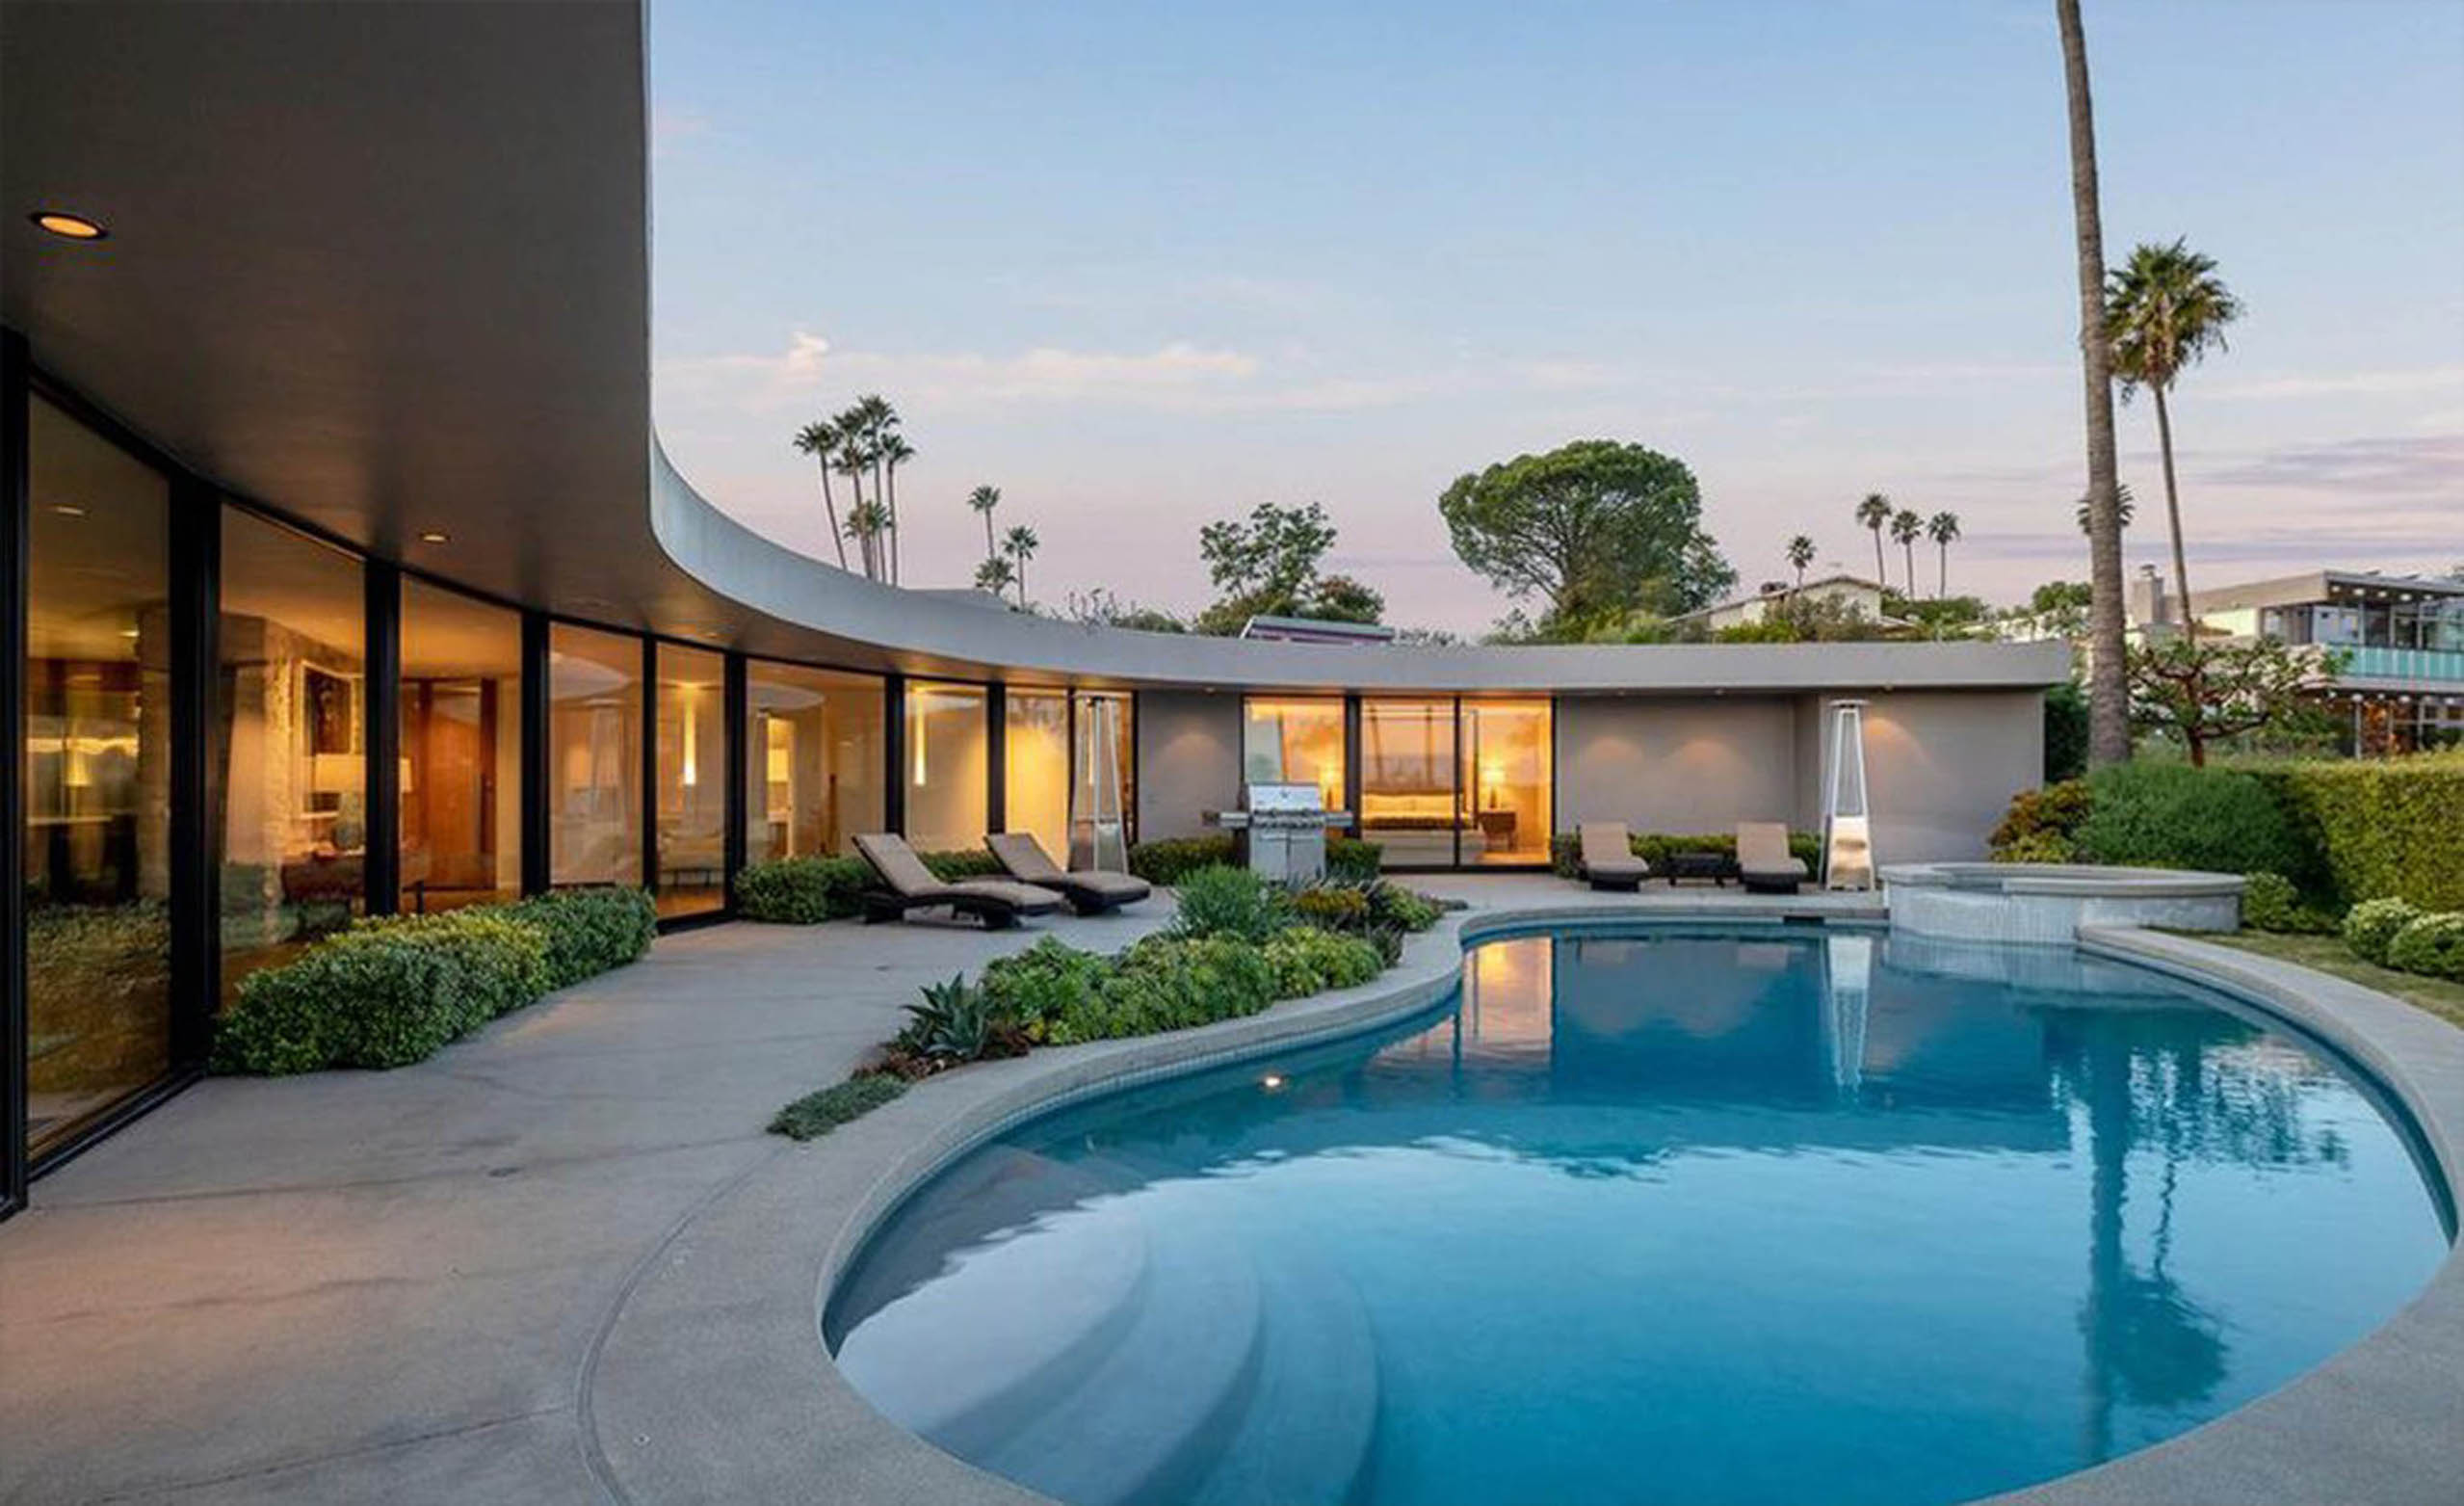 25-9-2019

Elon Musk has sold one of his homes in Los Angeles, California for .925 million. With 3,077 square feet of living space, there are 4 bedrooms and 3.5 bathrooms.

Pictured: Elon Musk's house, Image: 473191835, License: Rights-managed, Restrictions: , Model Release: no, Credit line: REALTOR / Planet / Profimedia